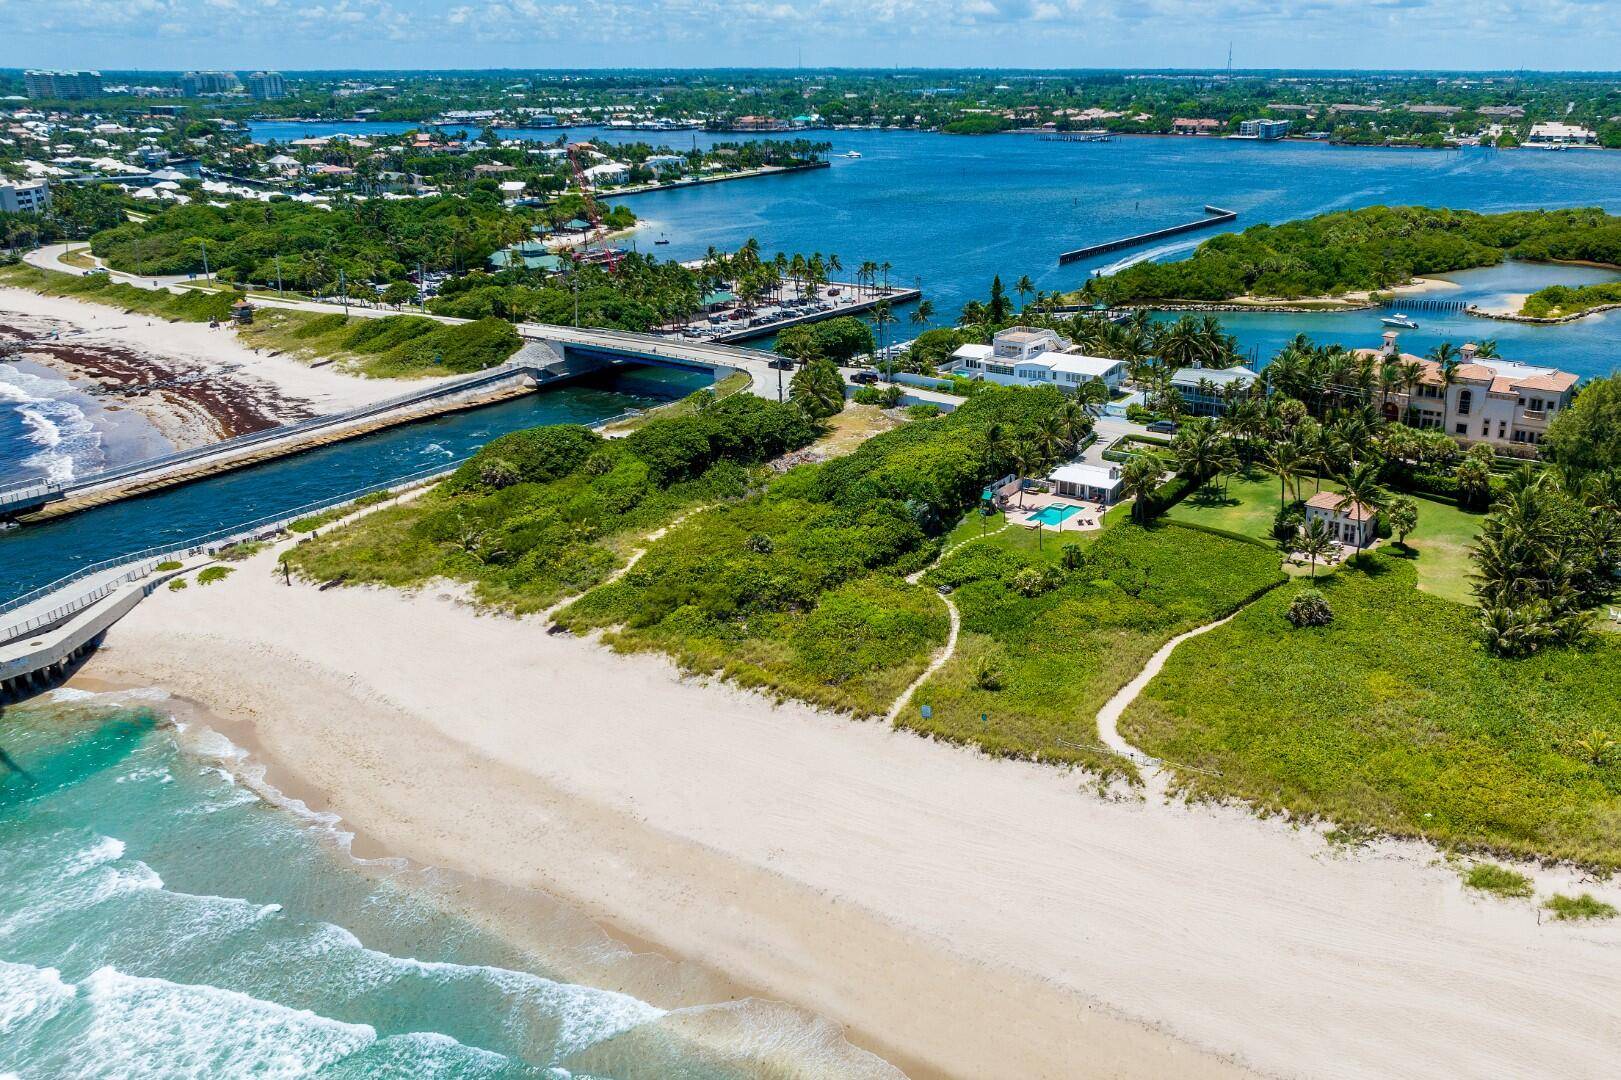 Rare Ocean to Lake double lot property with 250 feet of lake frontage and 235 feet of ocean frontage.